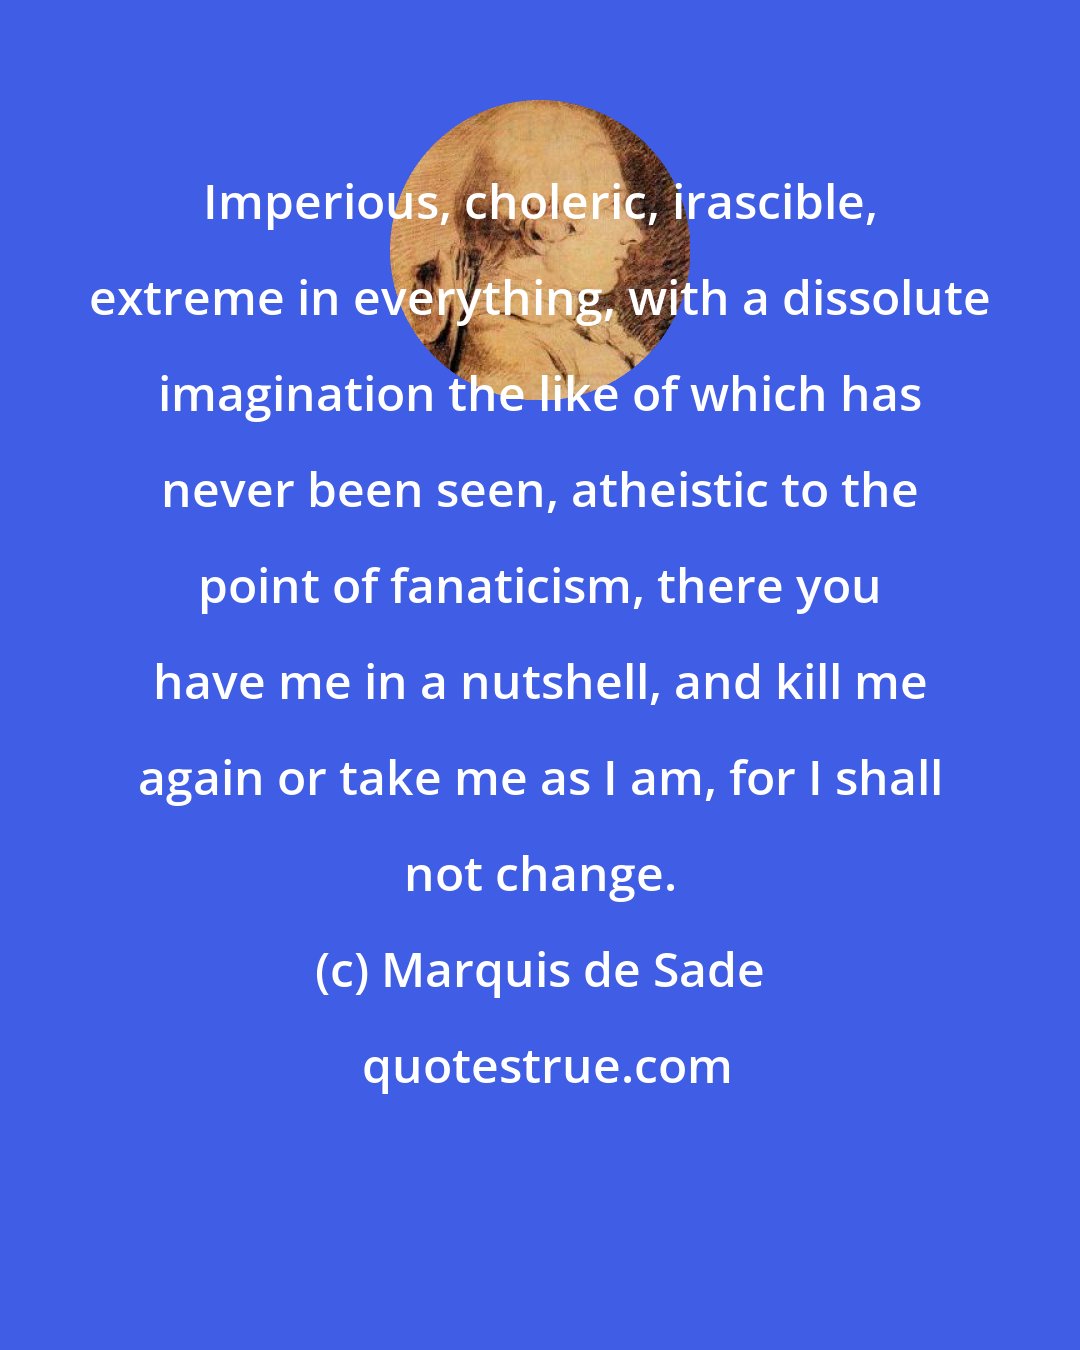 Marquis de Sade: Imperious, choleric, irascible, extreme in everything, with a dissolute imagination the like of which has never been seen, atheistic to the point of fanaticism, there you have me in a nutshell, and kill me again or take me as I am, for I shall not change.